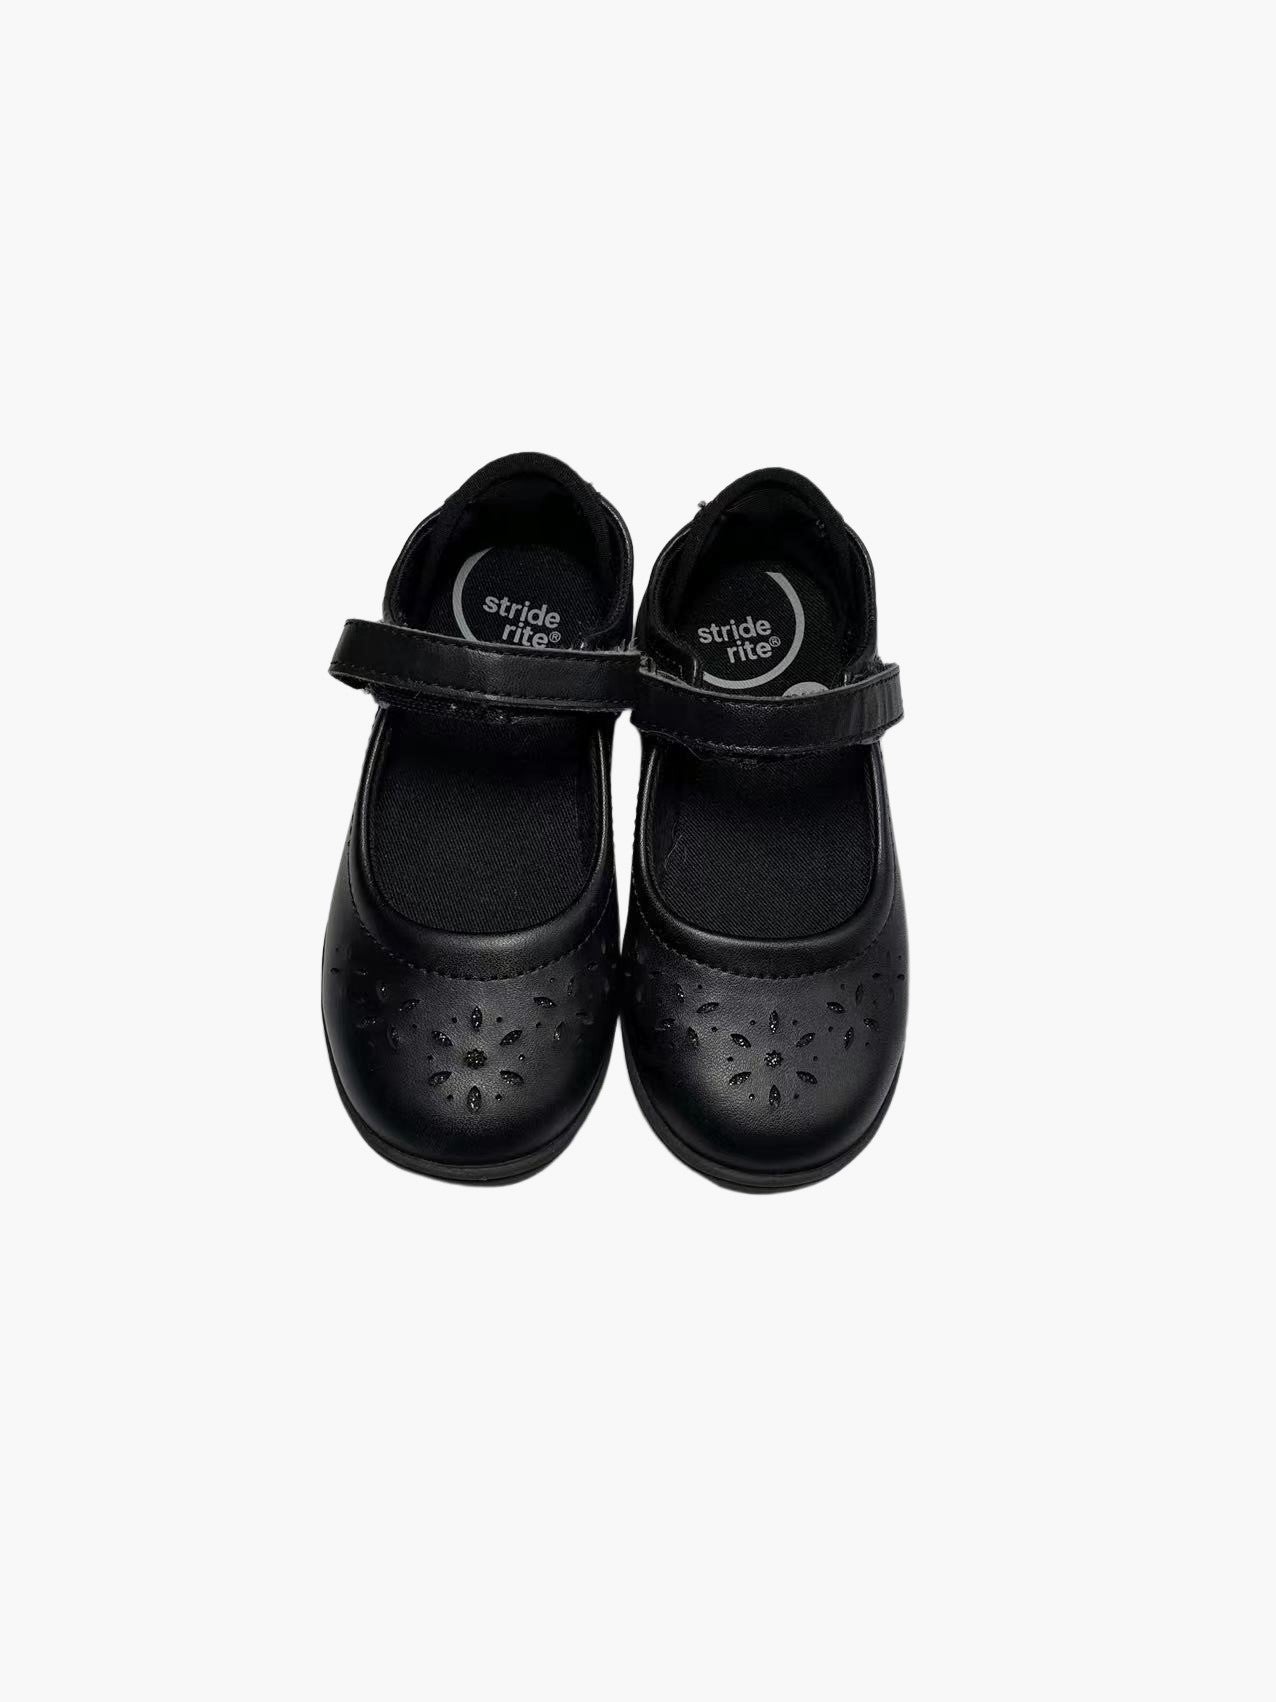 Stride Rite Leather Shoes(US9)-Toddler